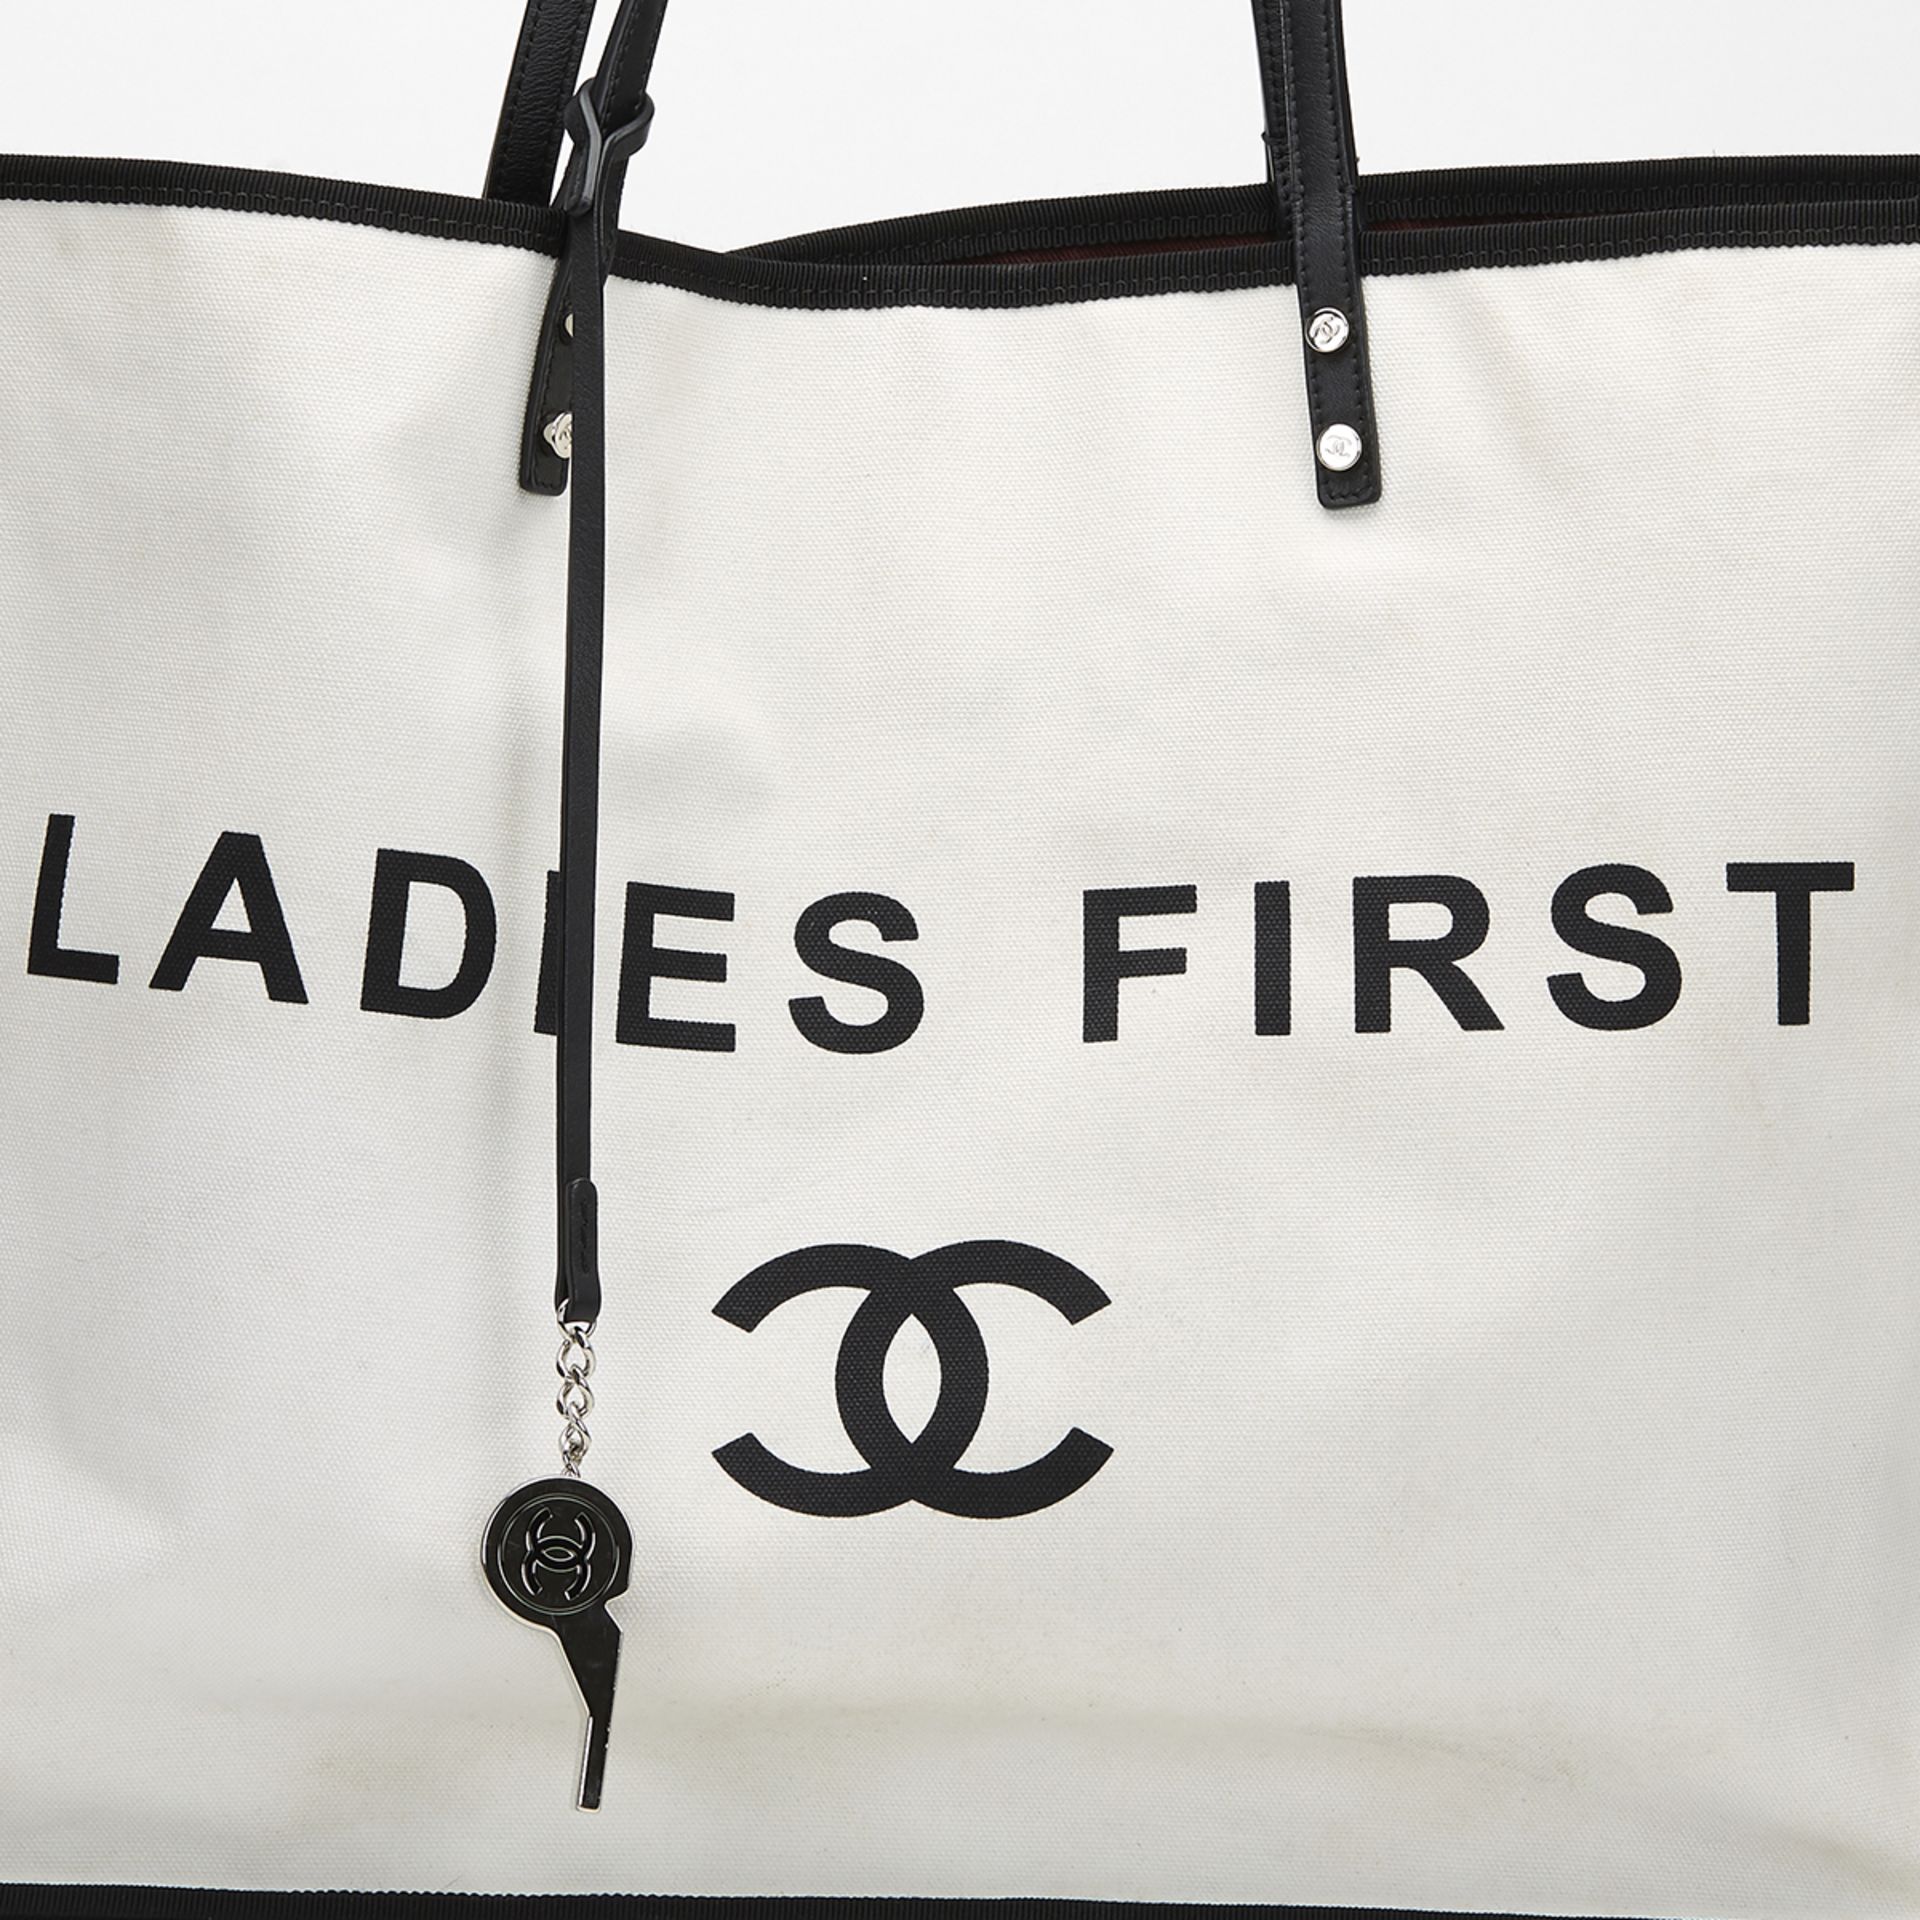 CHANEL Ladies First Shopper Tote - Image 7 of 9